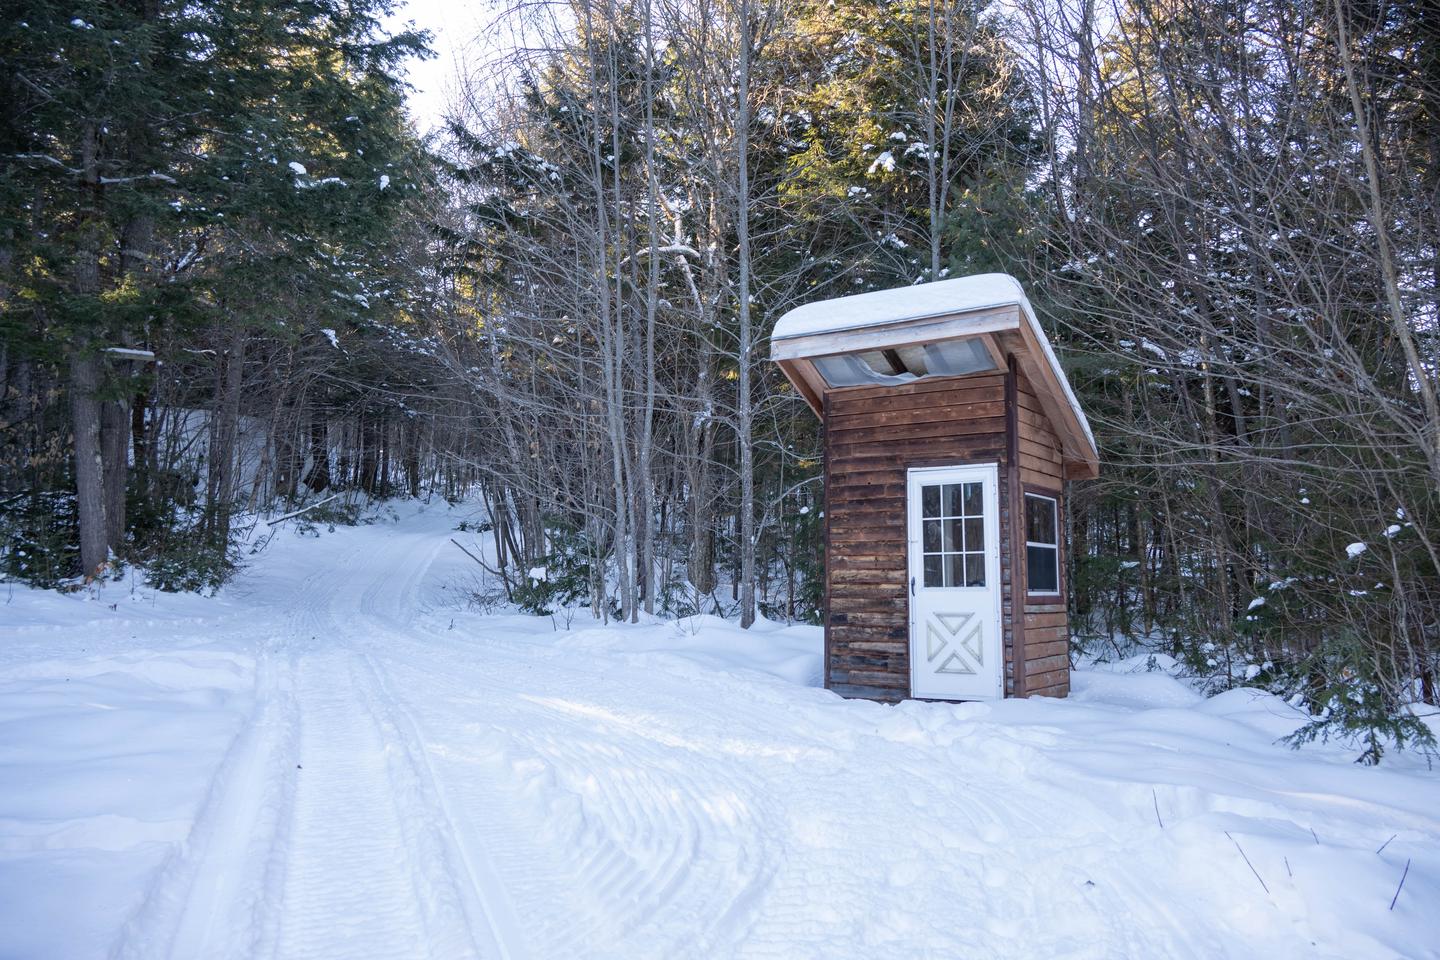 A small rectangular wooden shack structure with a white door and slanted roof is the structure of a pit toilet. The building is outside surrounded by snow in the woods.An outhouse is available just outside of Big Spring Brook Hut.